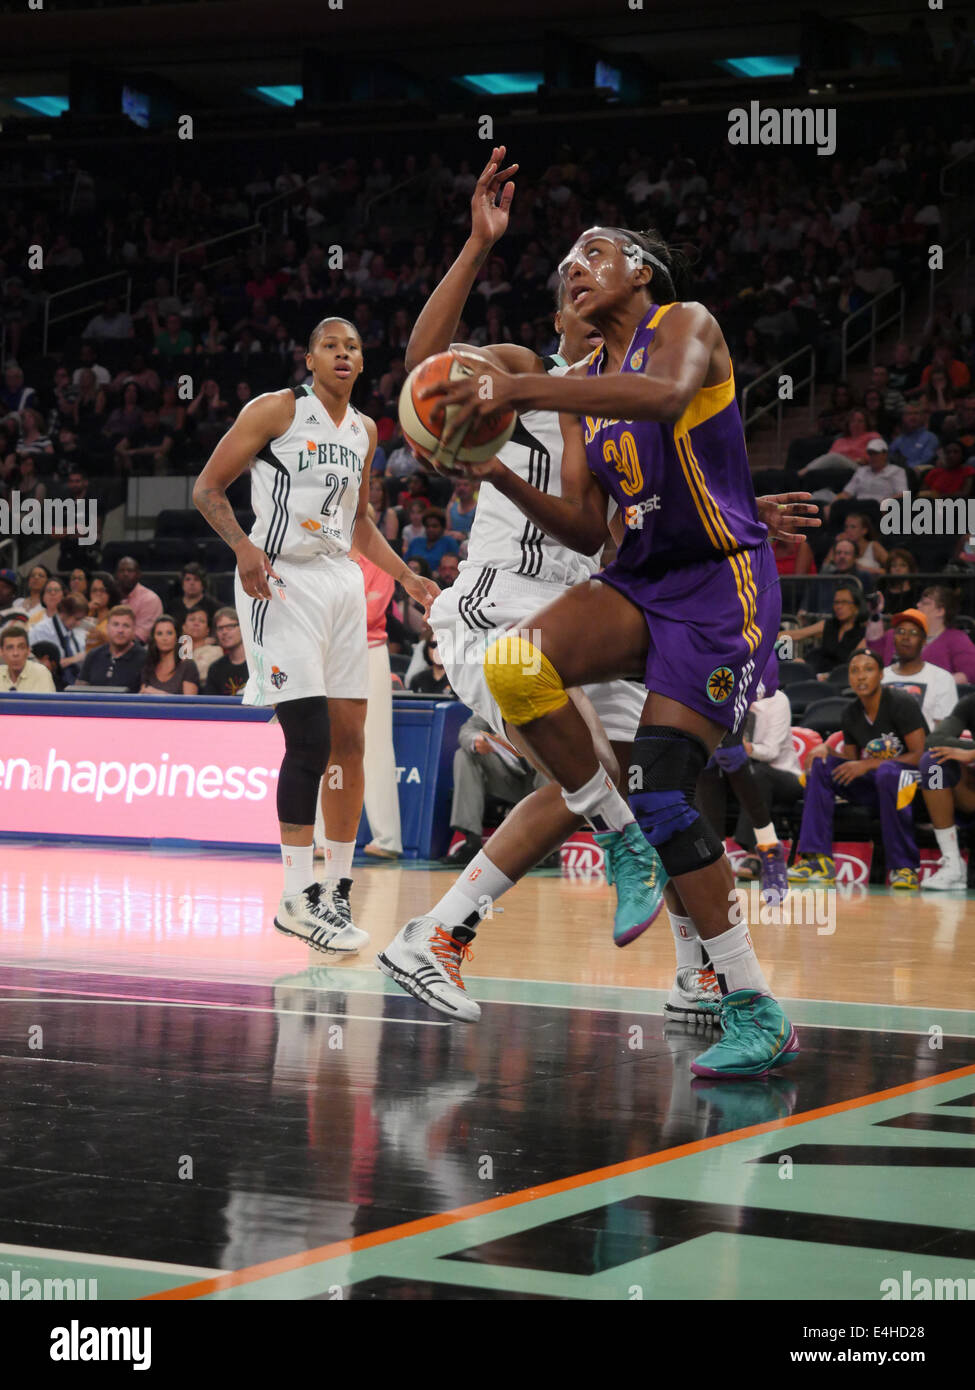 New York City, New Jersey, USA. 11th July, 2014. Los Angeles Sparks forward, NNEKA OGWUMIKE (30), drives to the basket against New York in a game at Madison Square Garden in New York City. © Joel Plummer/ZUMA Wire/Alamy Live News Stock Photo